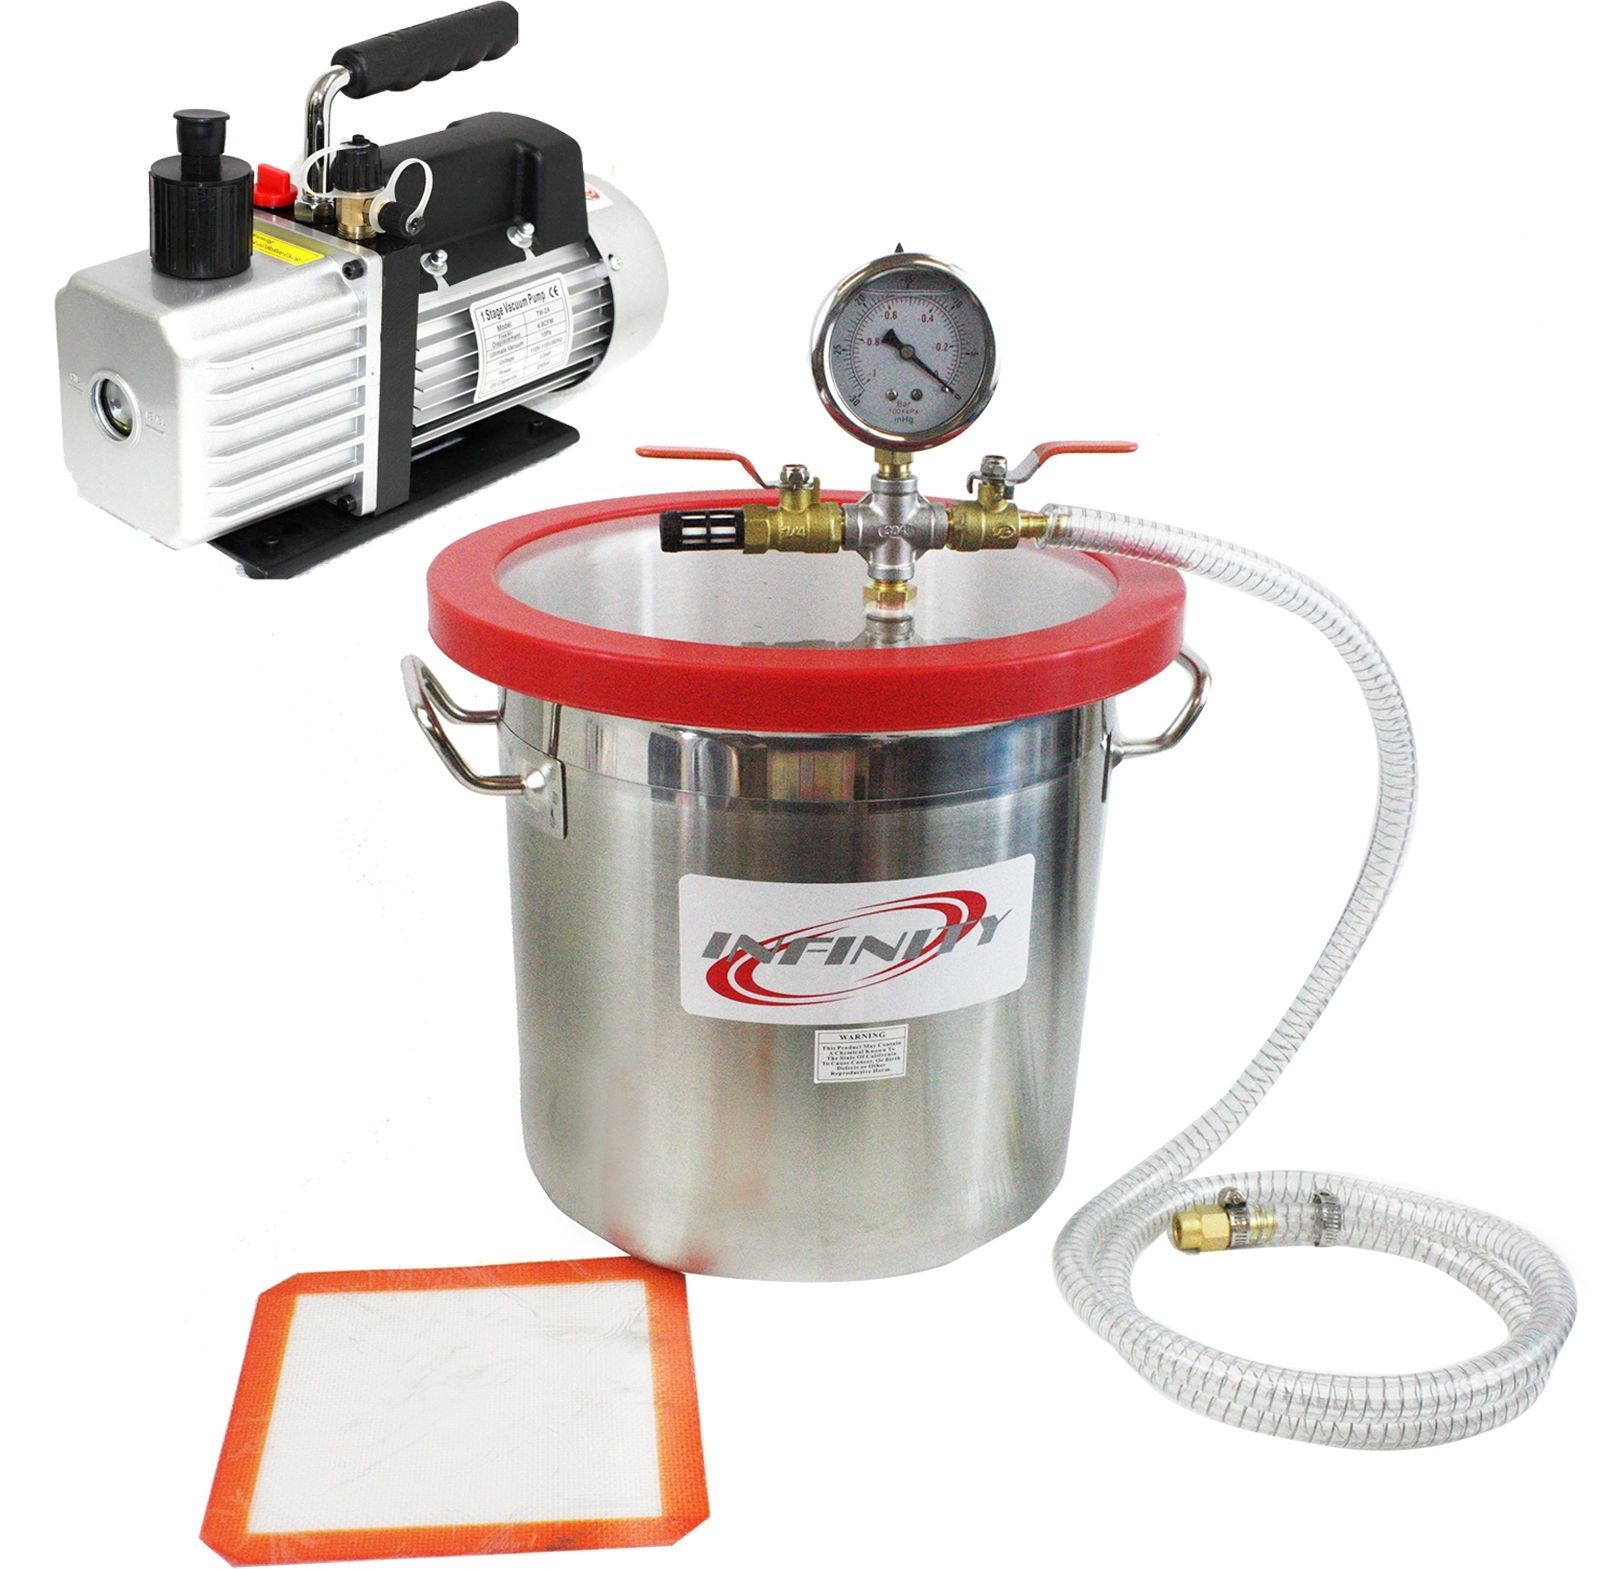 Epoxy Purge Degas Resin Silicone 2qt Stainless Steel Best Value Vacs Vacuum Degassing Chamber and Mini 3CFM Single Stage Vacuum Pump Kit